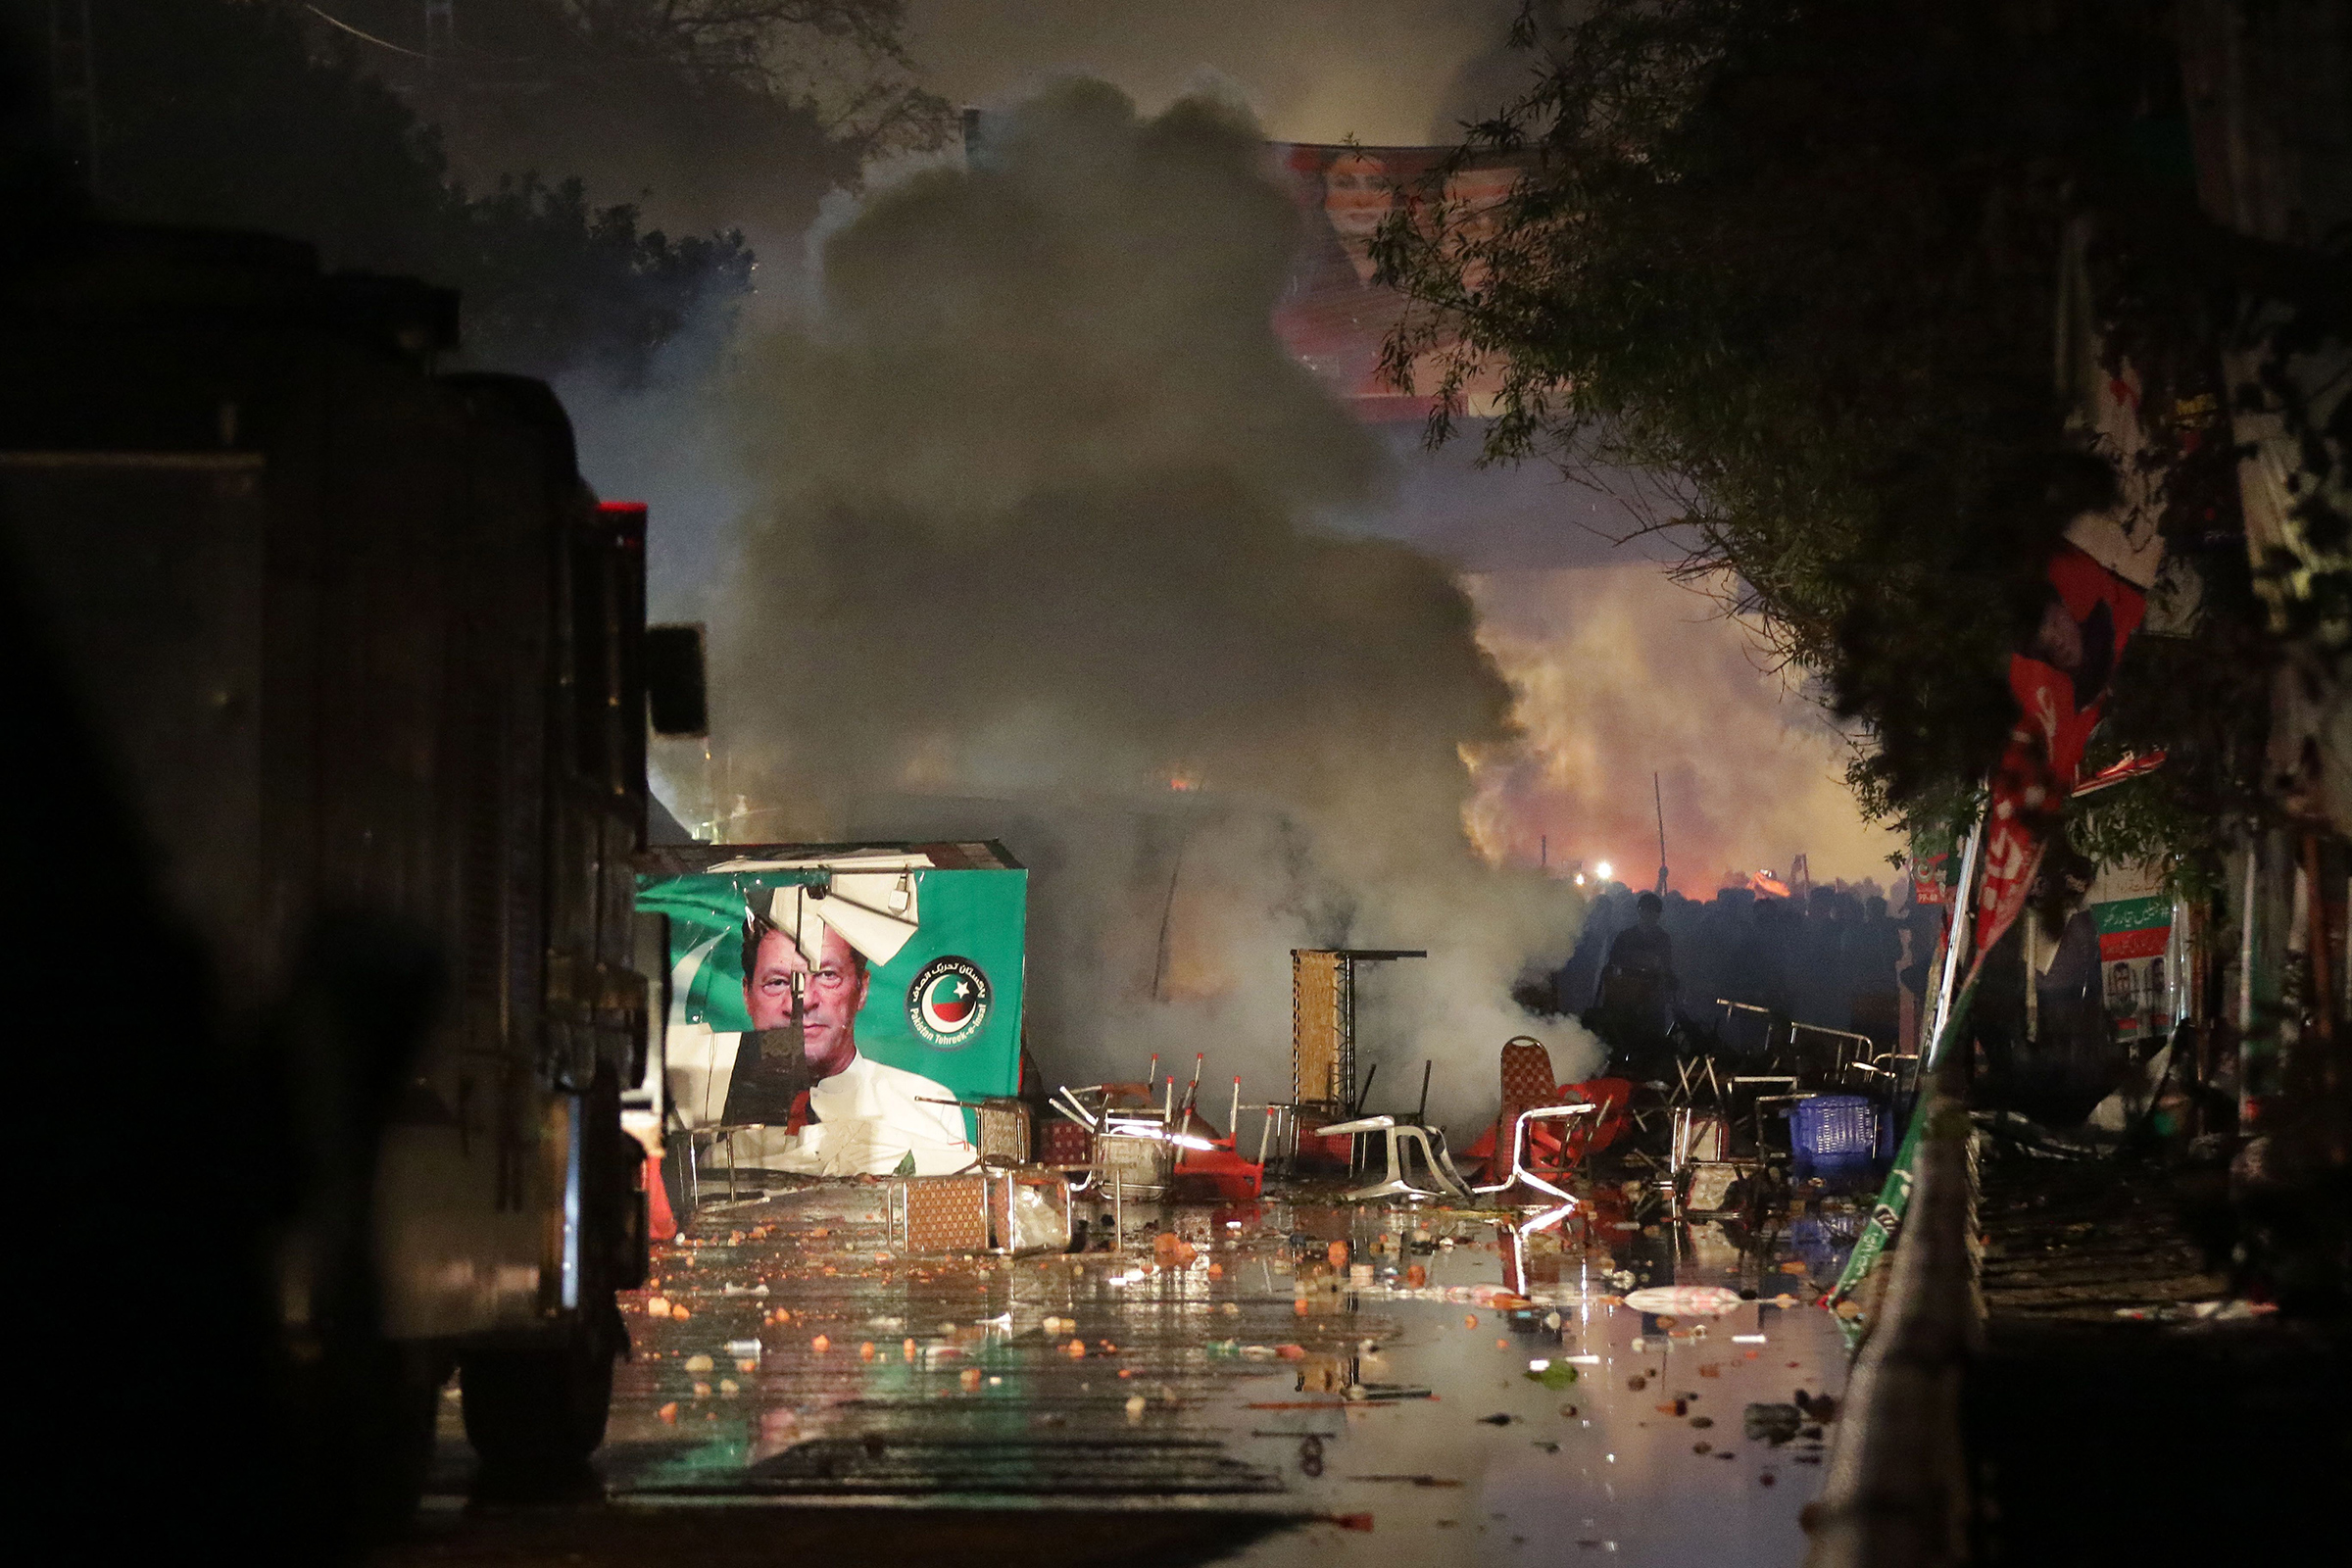 Police fired teargas to disperse the supporters of the former Prime Minister as they tried to arrest Khan in Lahore, Pakistan, on March 14. Hundreds of Tehrik-e-Insaf supporters clashed with riot police as they reached Khan's residence. (Rahat Dar—EPA-EFE/Shutterstock)